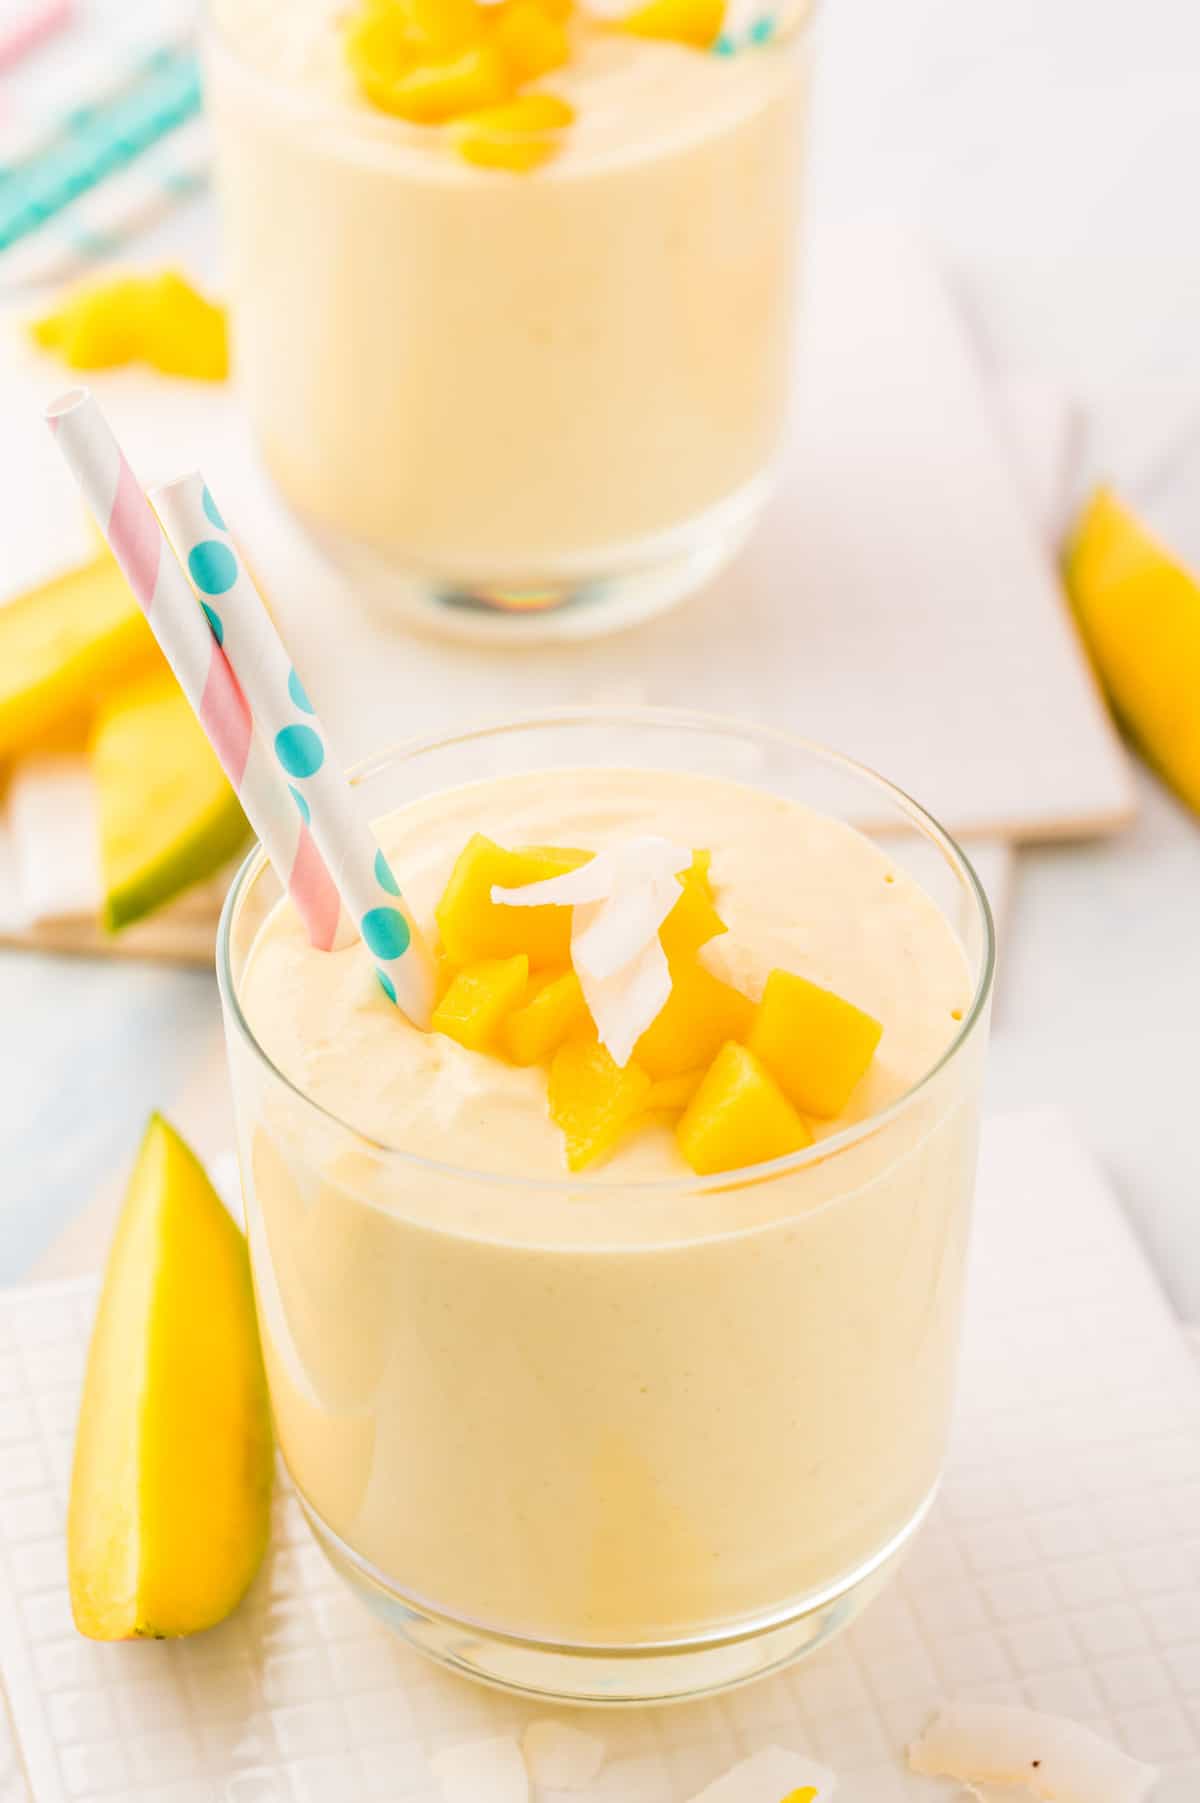 Smoothie topped with fresh mango and shredded coconut. Another in the background.